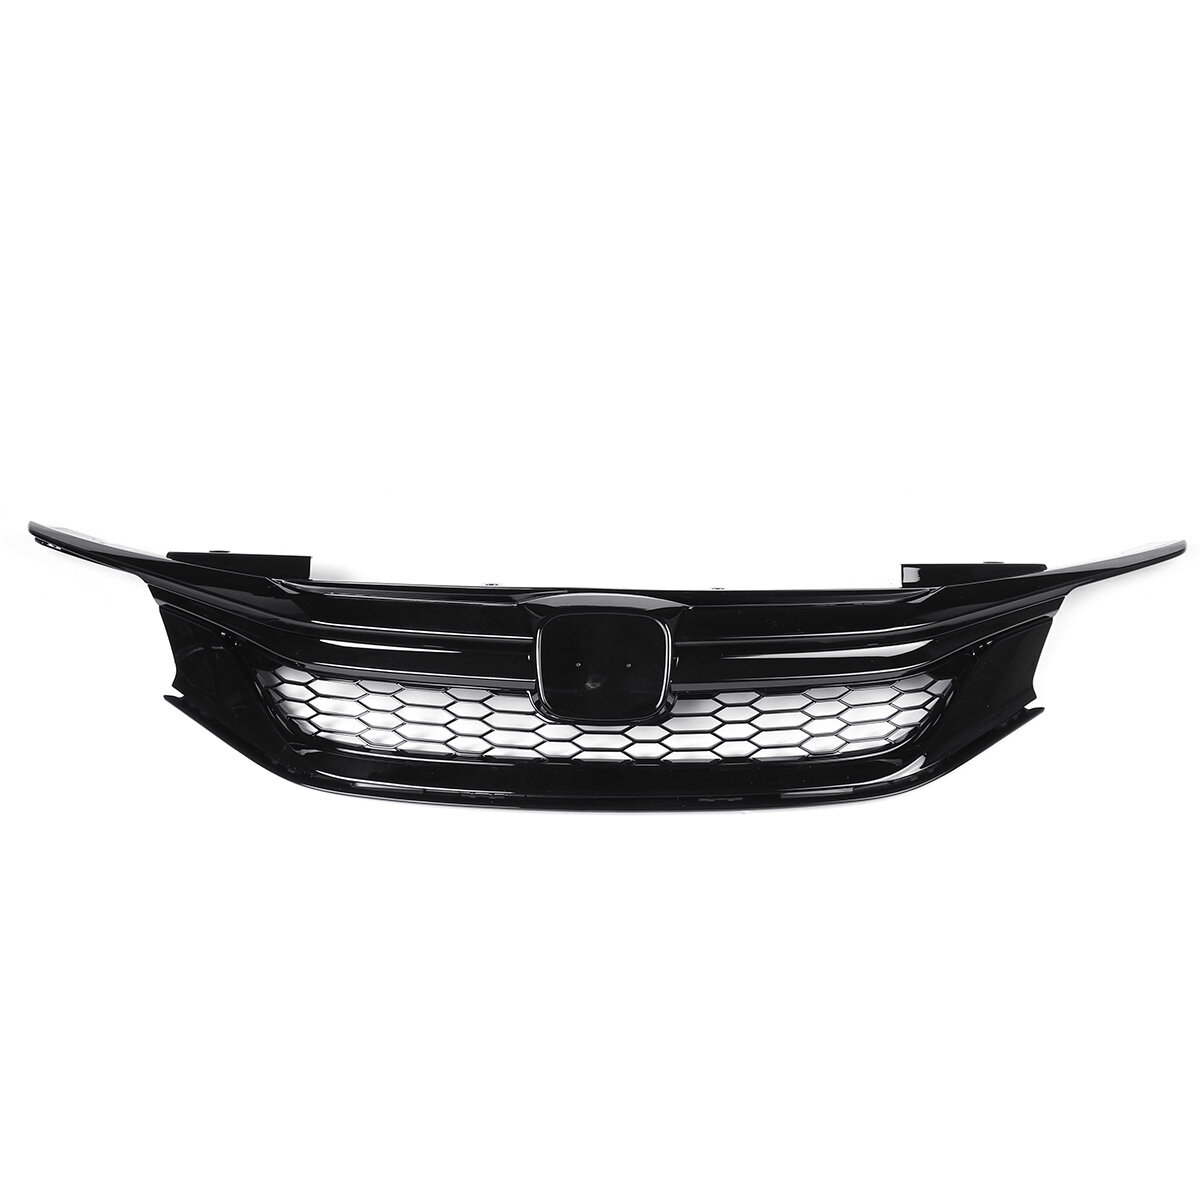 Sport Style Front Car Grille Front Bumper For 16-17 9th Gen HD Accord Sedan Glossy Black JDM